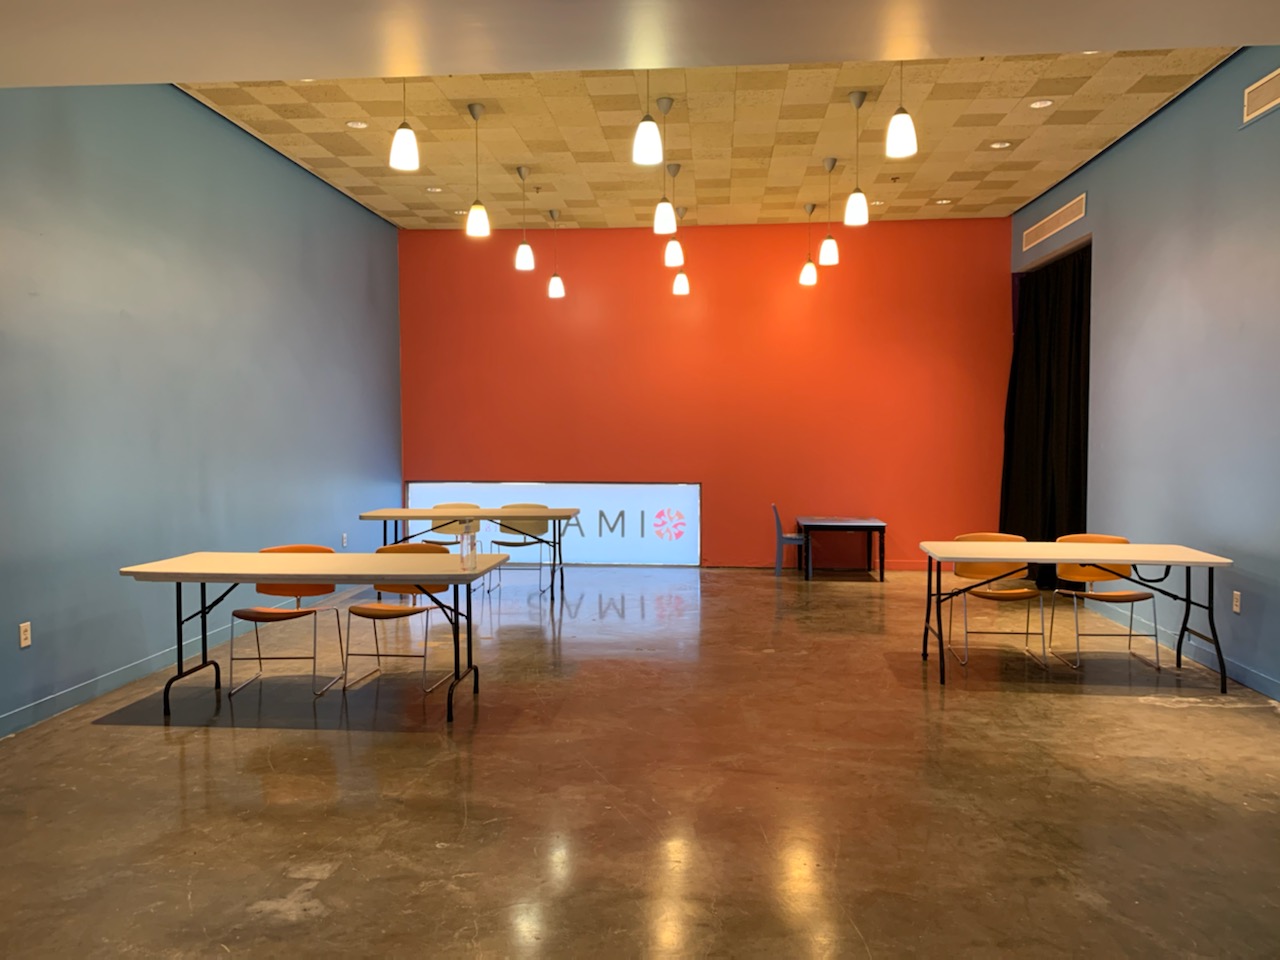 he Ann Moore Art Studio at the museum became a charging station with tables spaced 6 feet apart. Visitors were encouraged to take advantage of our public Wi-Fi.